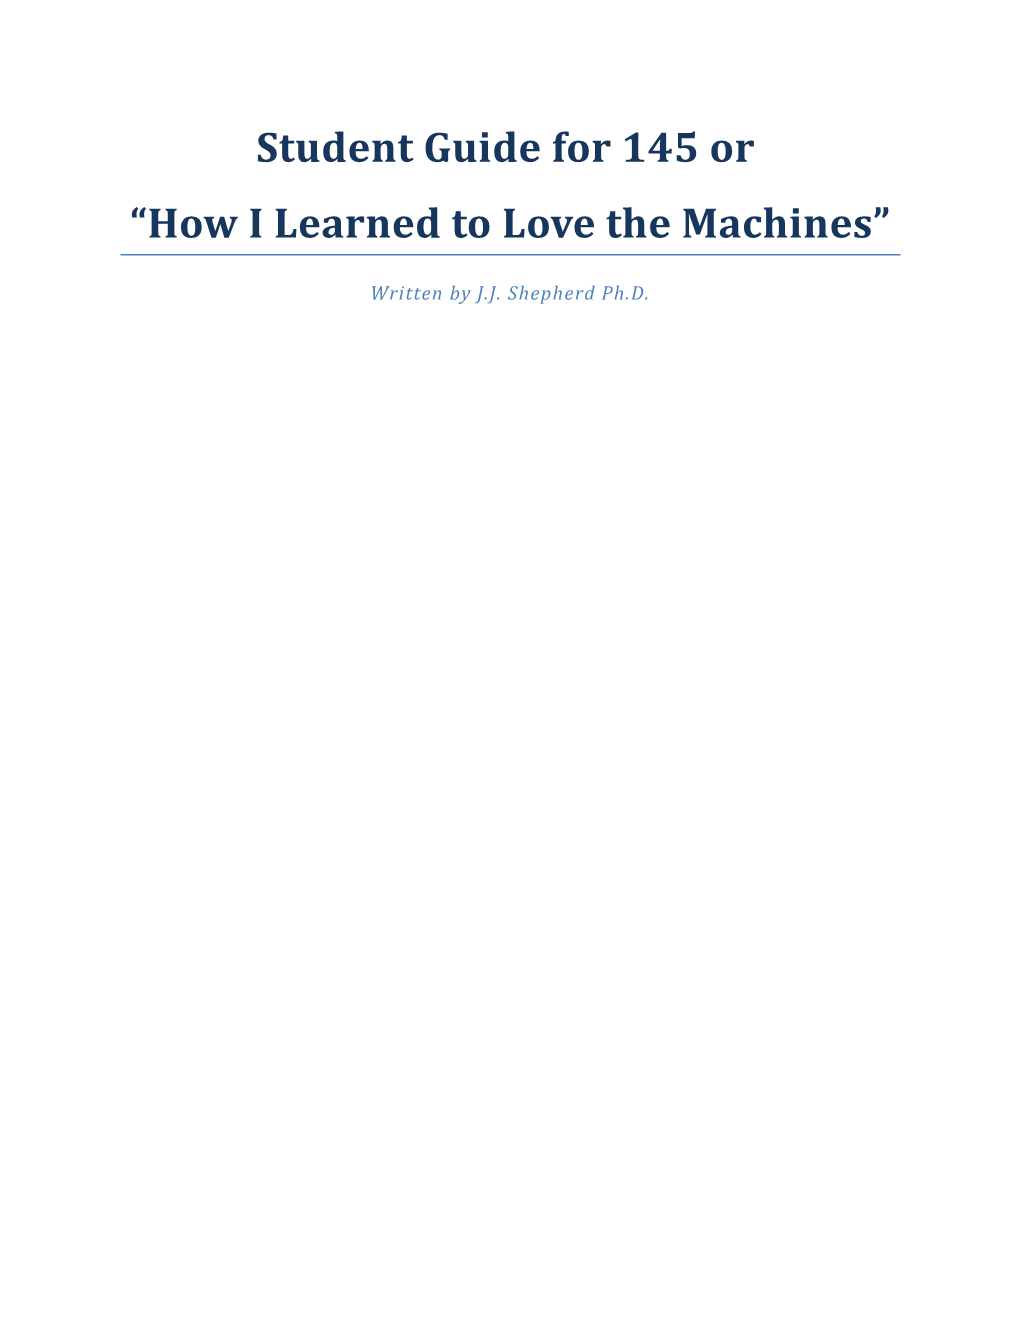 How I Learned to Love the Machines